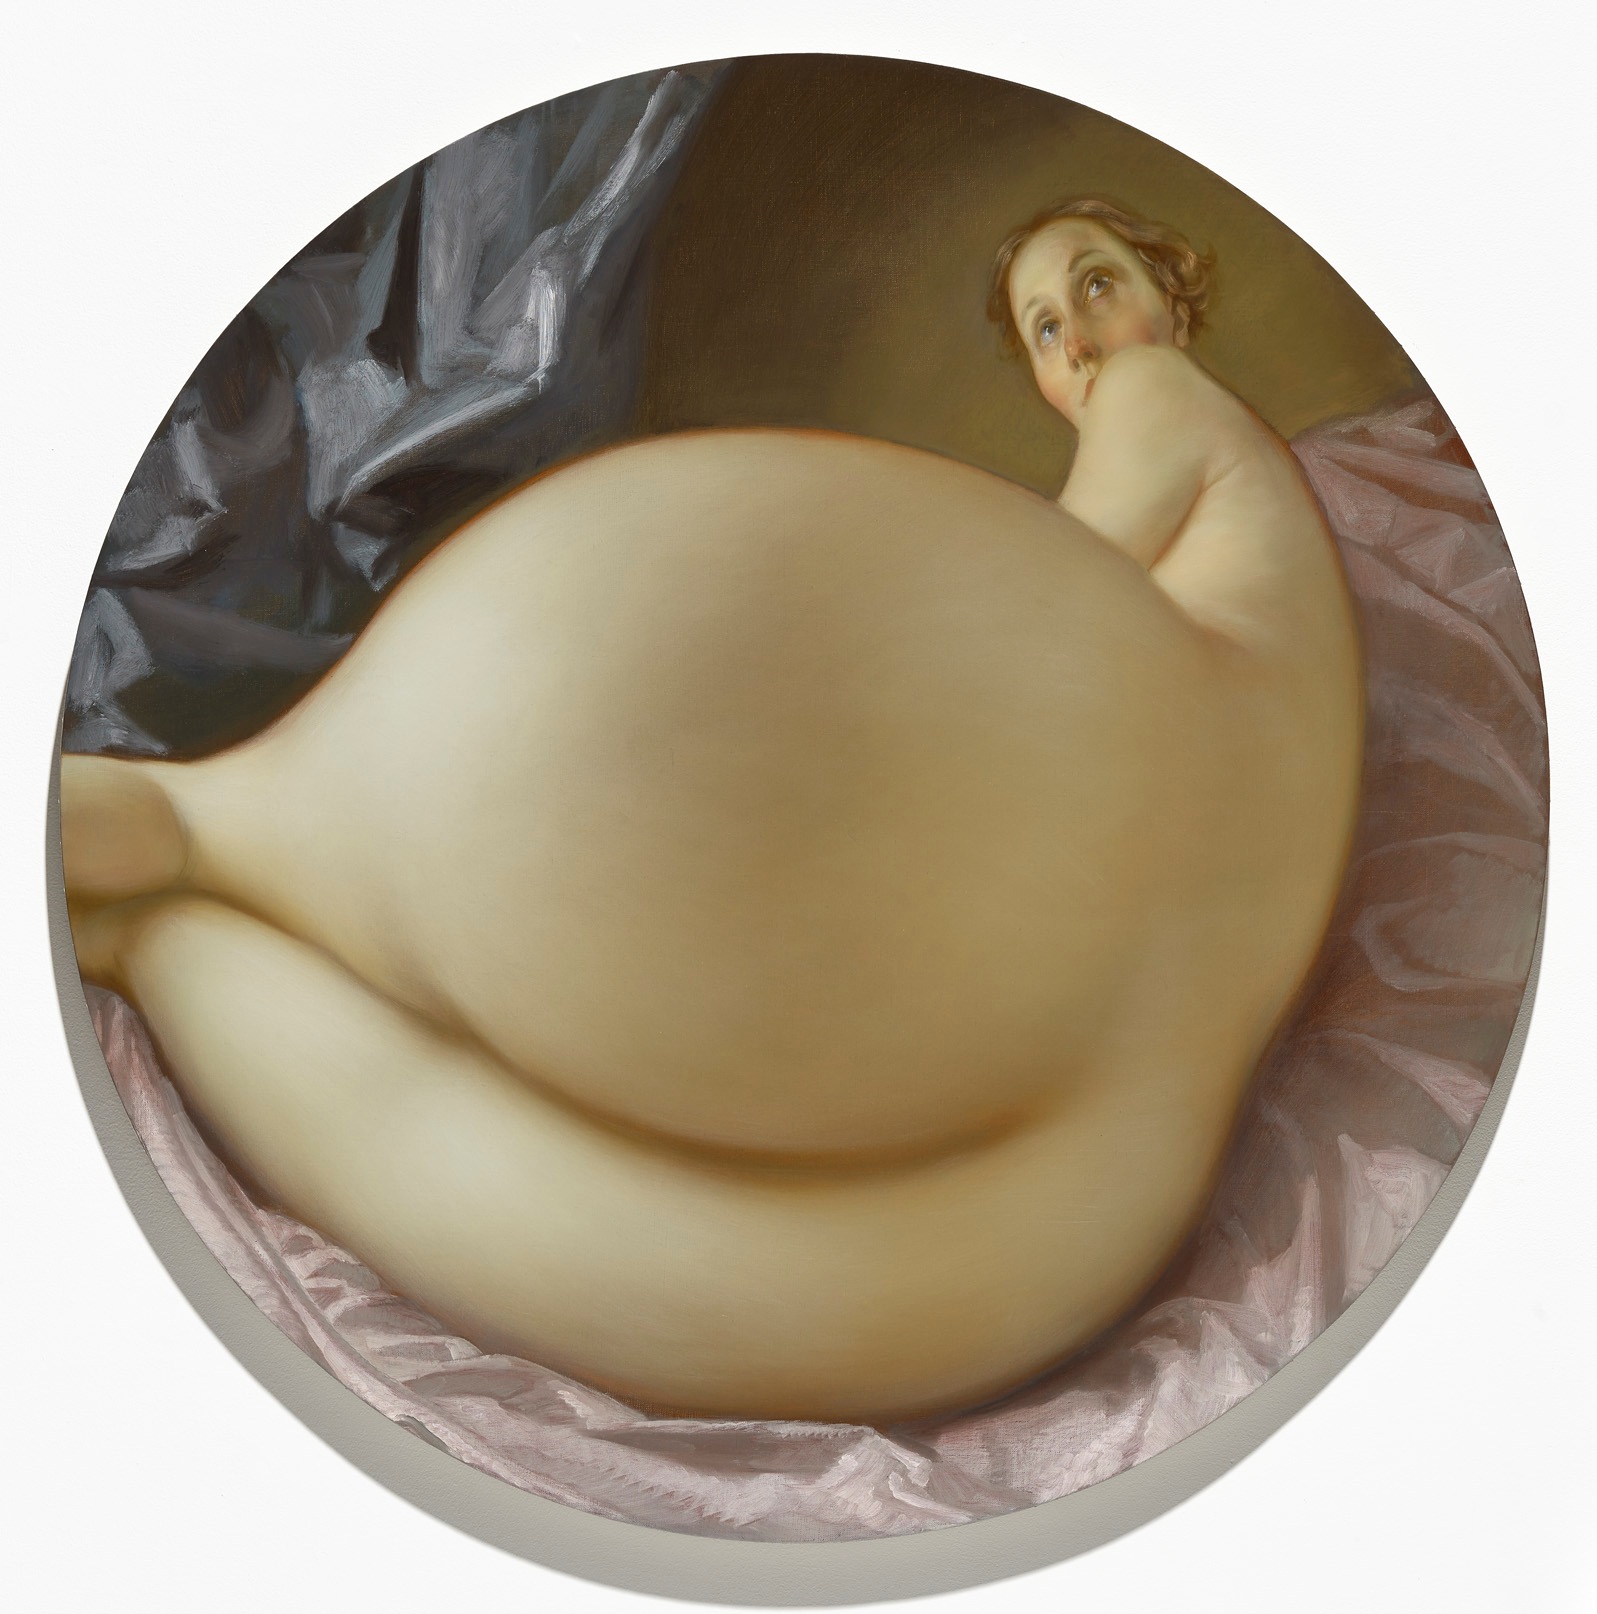 Nude in a Convex Mirror, 2015. Oil on canvas. Diameter: 42 inches. Private Collection. © John Currin. Courtesy Gagosian Gallery. Photography by Douglas M. Parker Studio